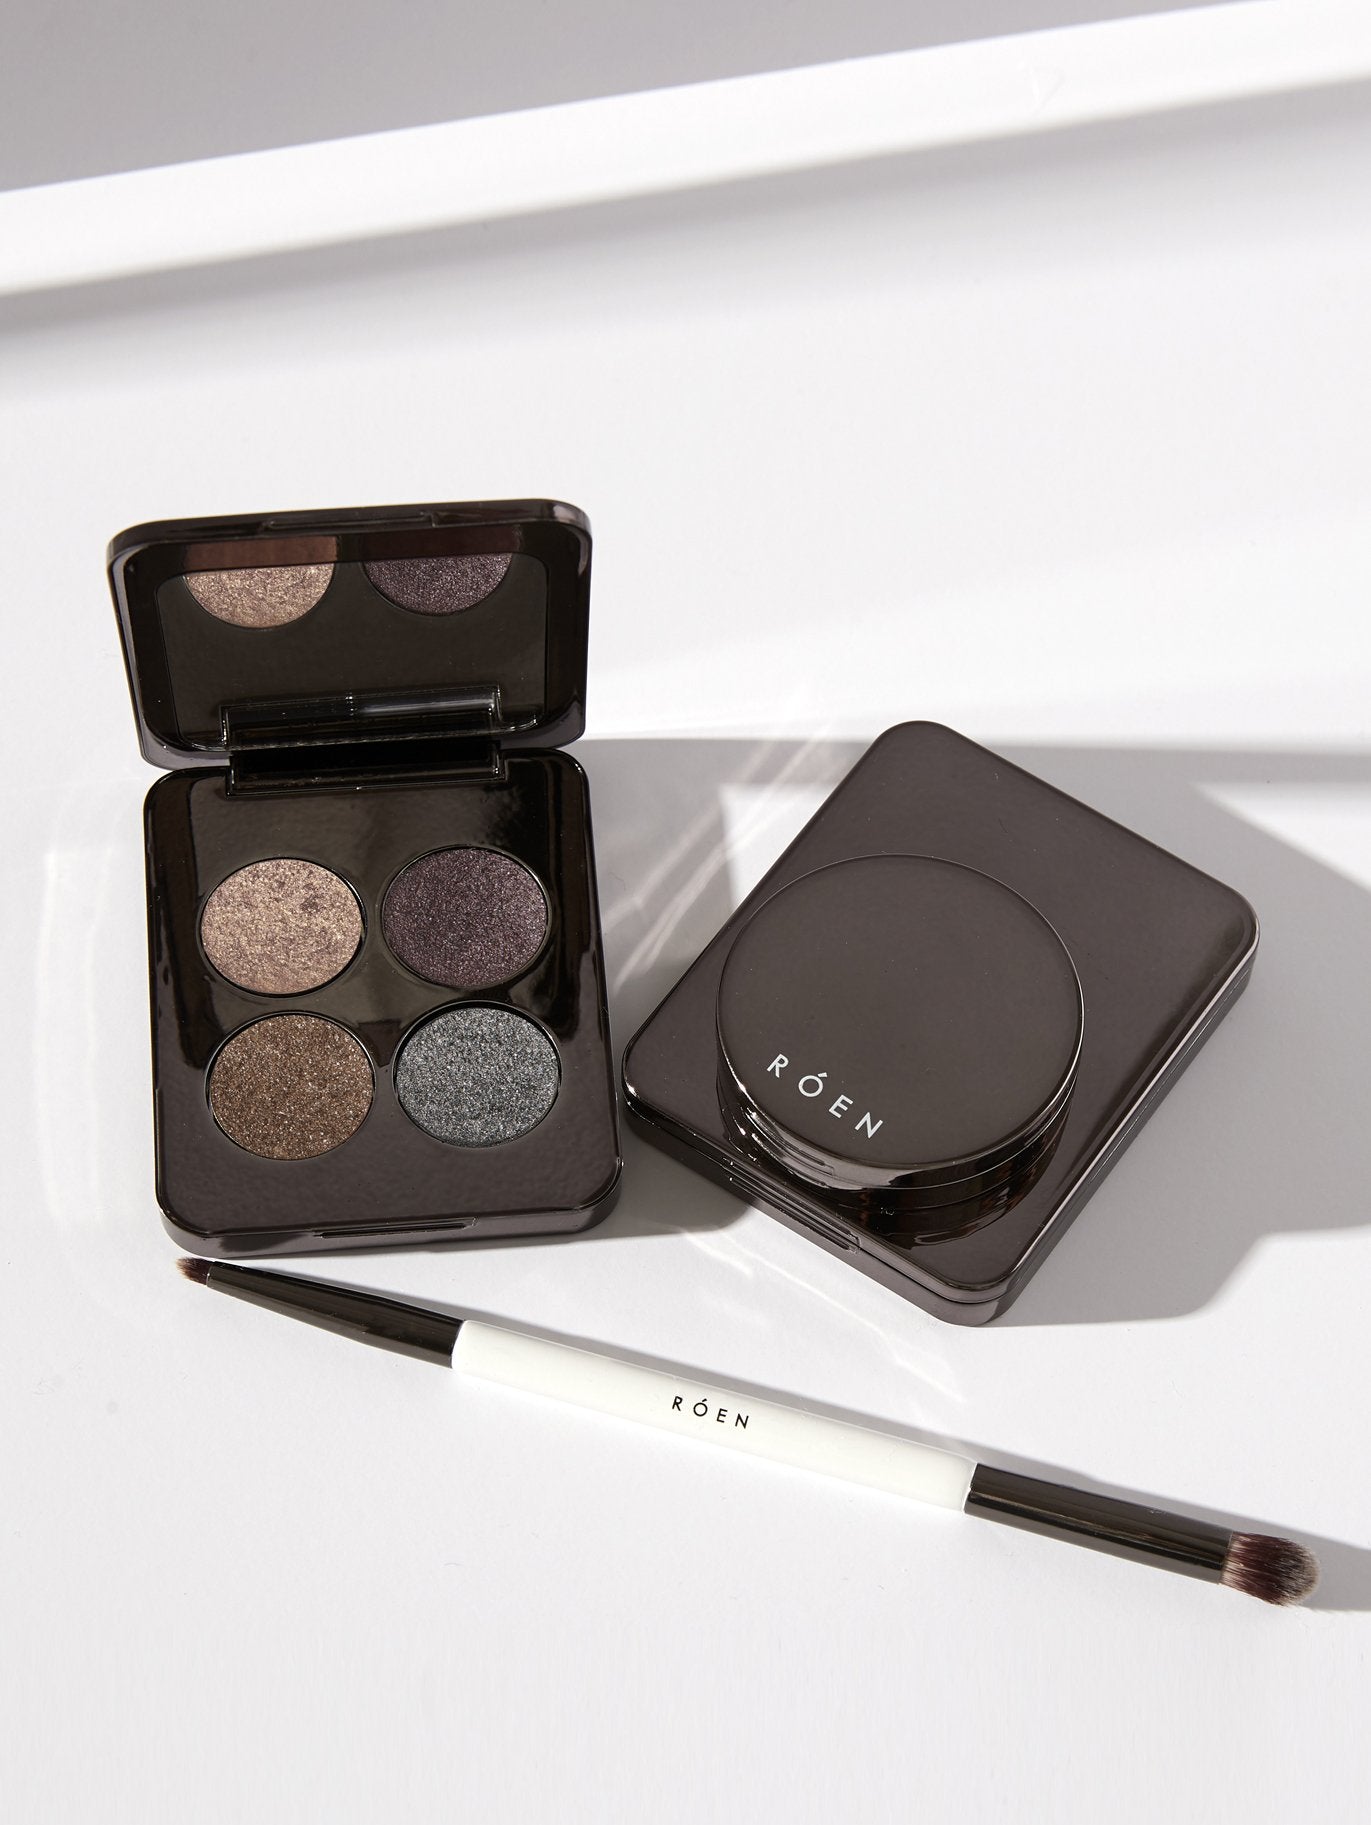 ROEN BEAUTY Makeup - With this COOL HERO palette you can mix, layer, and play to create effortless glamour.